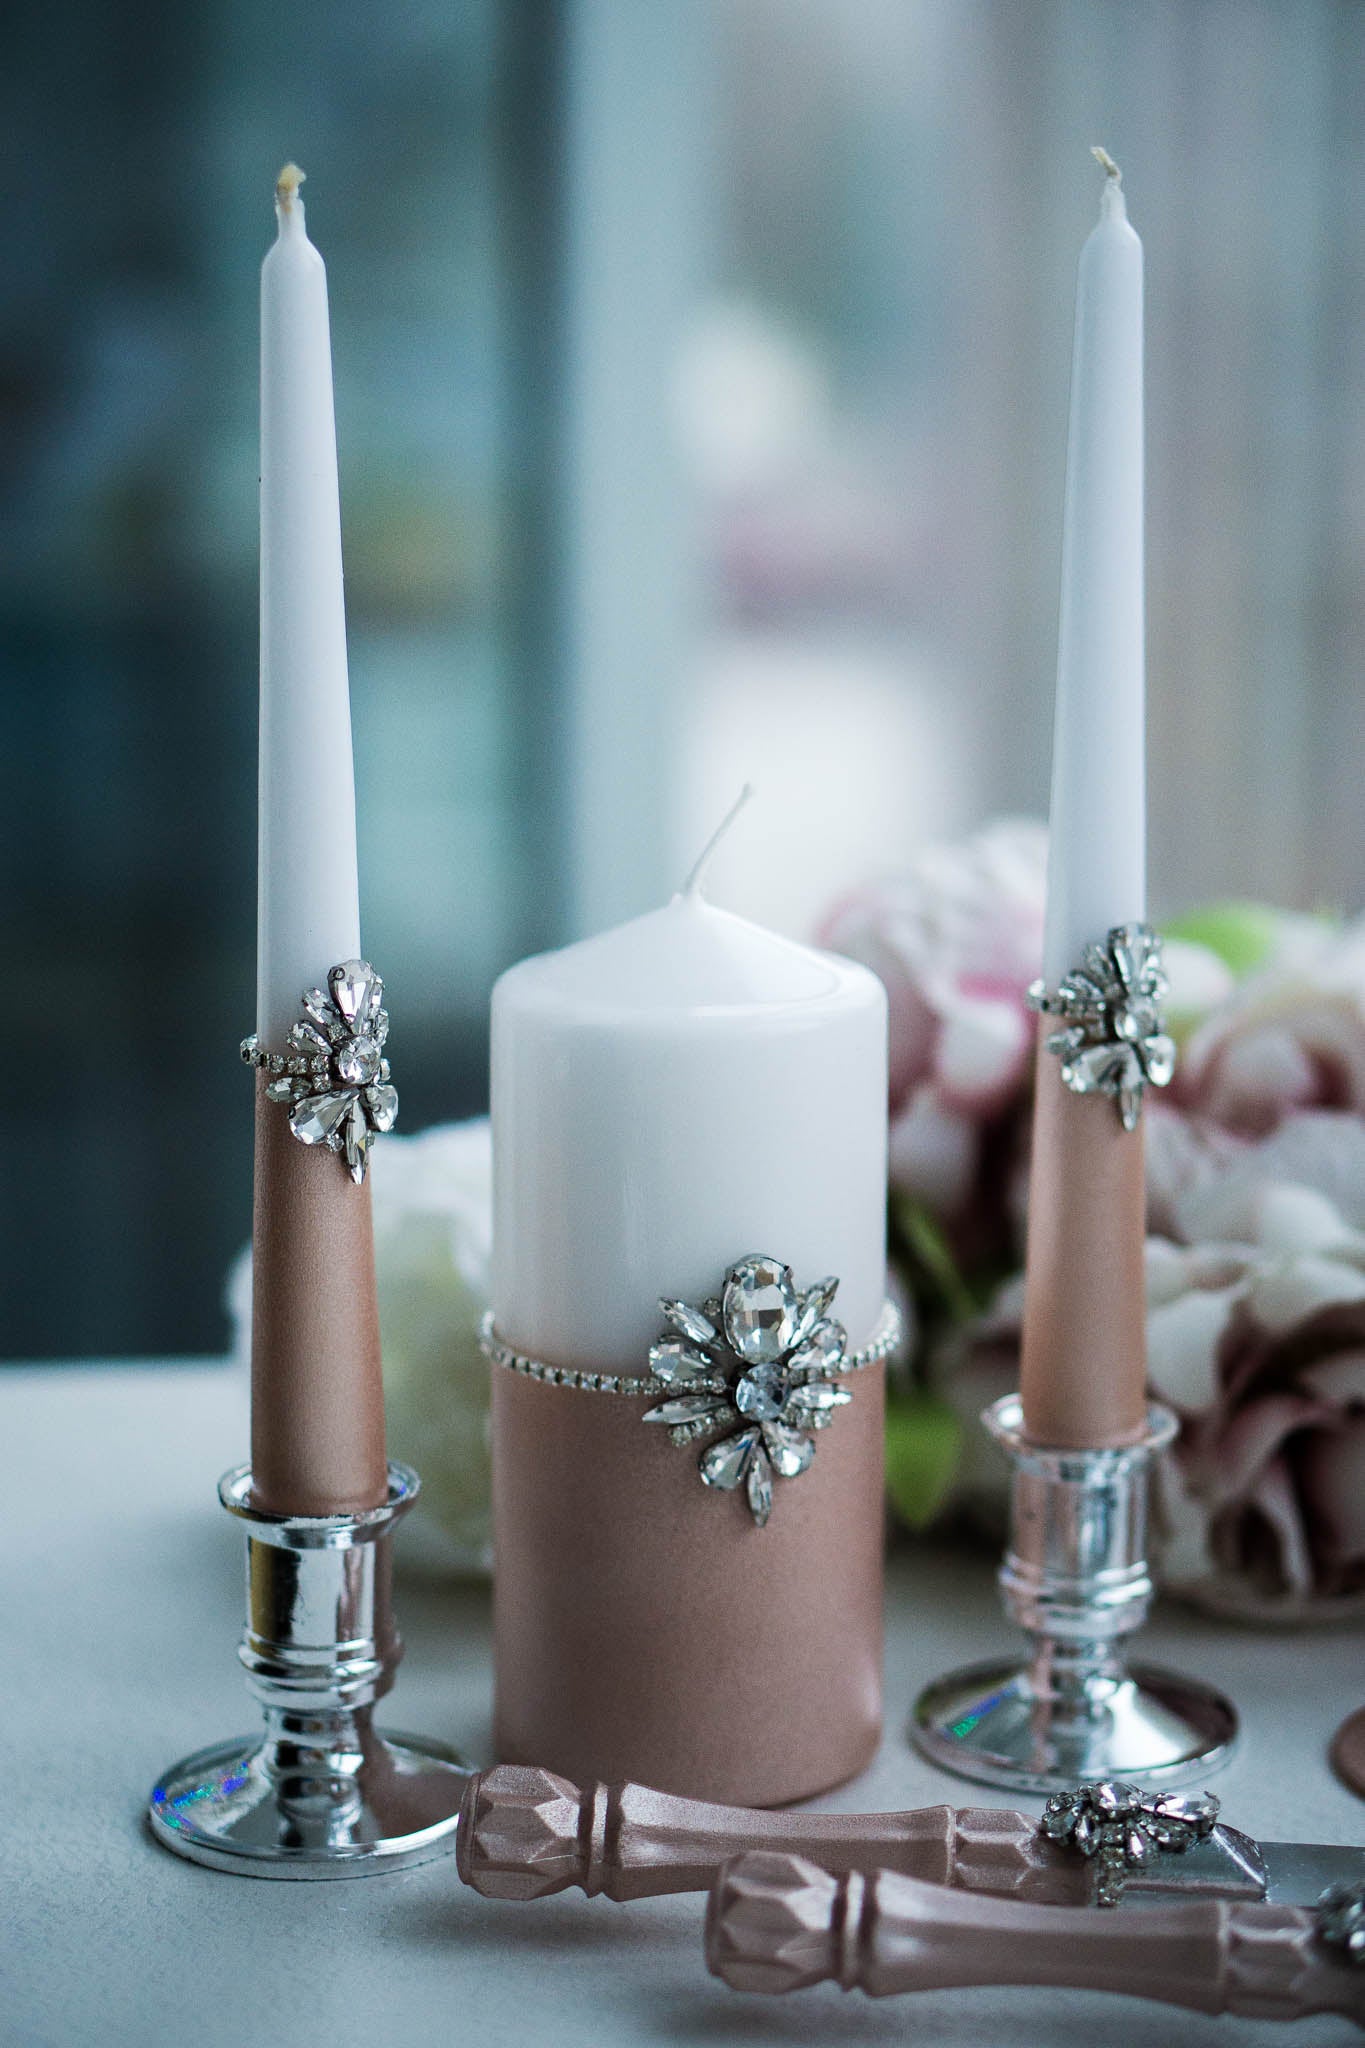 Personalized rose gold wedding candle set with elegant engravings.